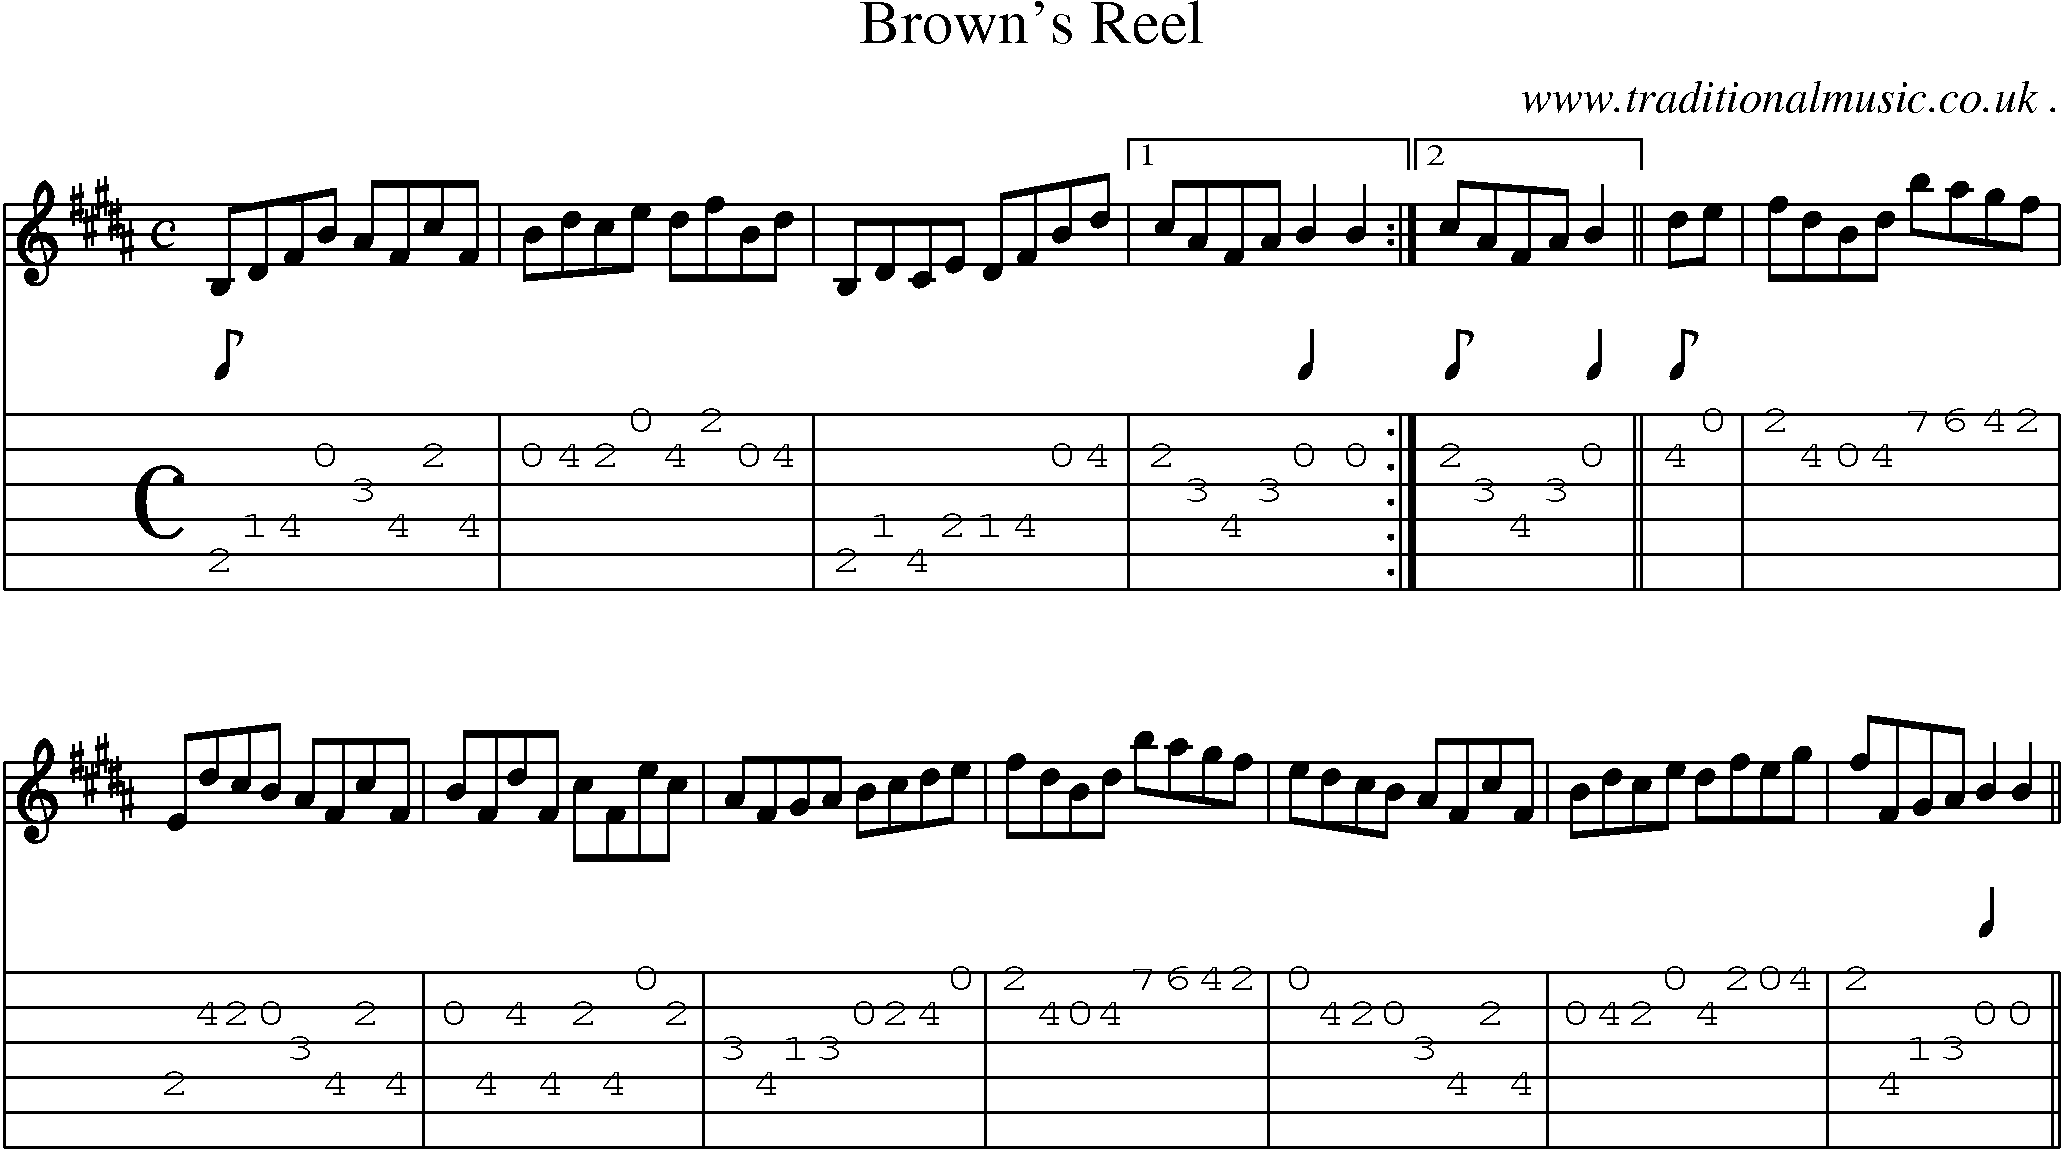 Sheet-music  score, Chords and Guitar Tabs for Browns Reel